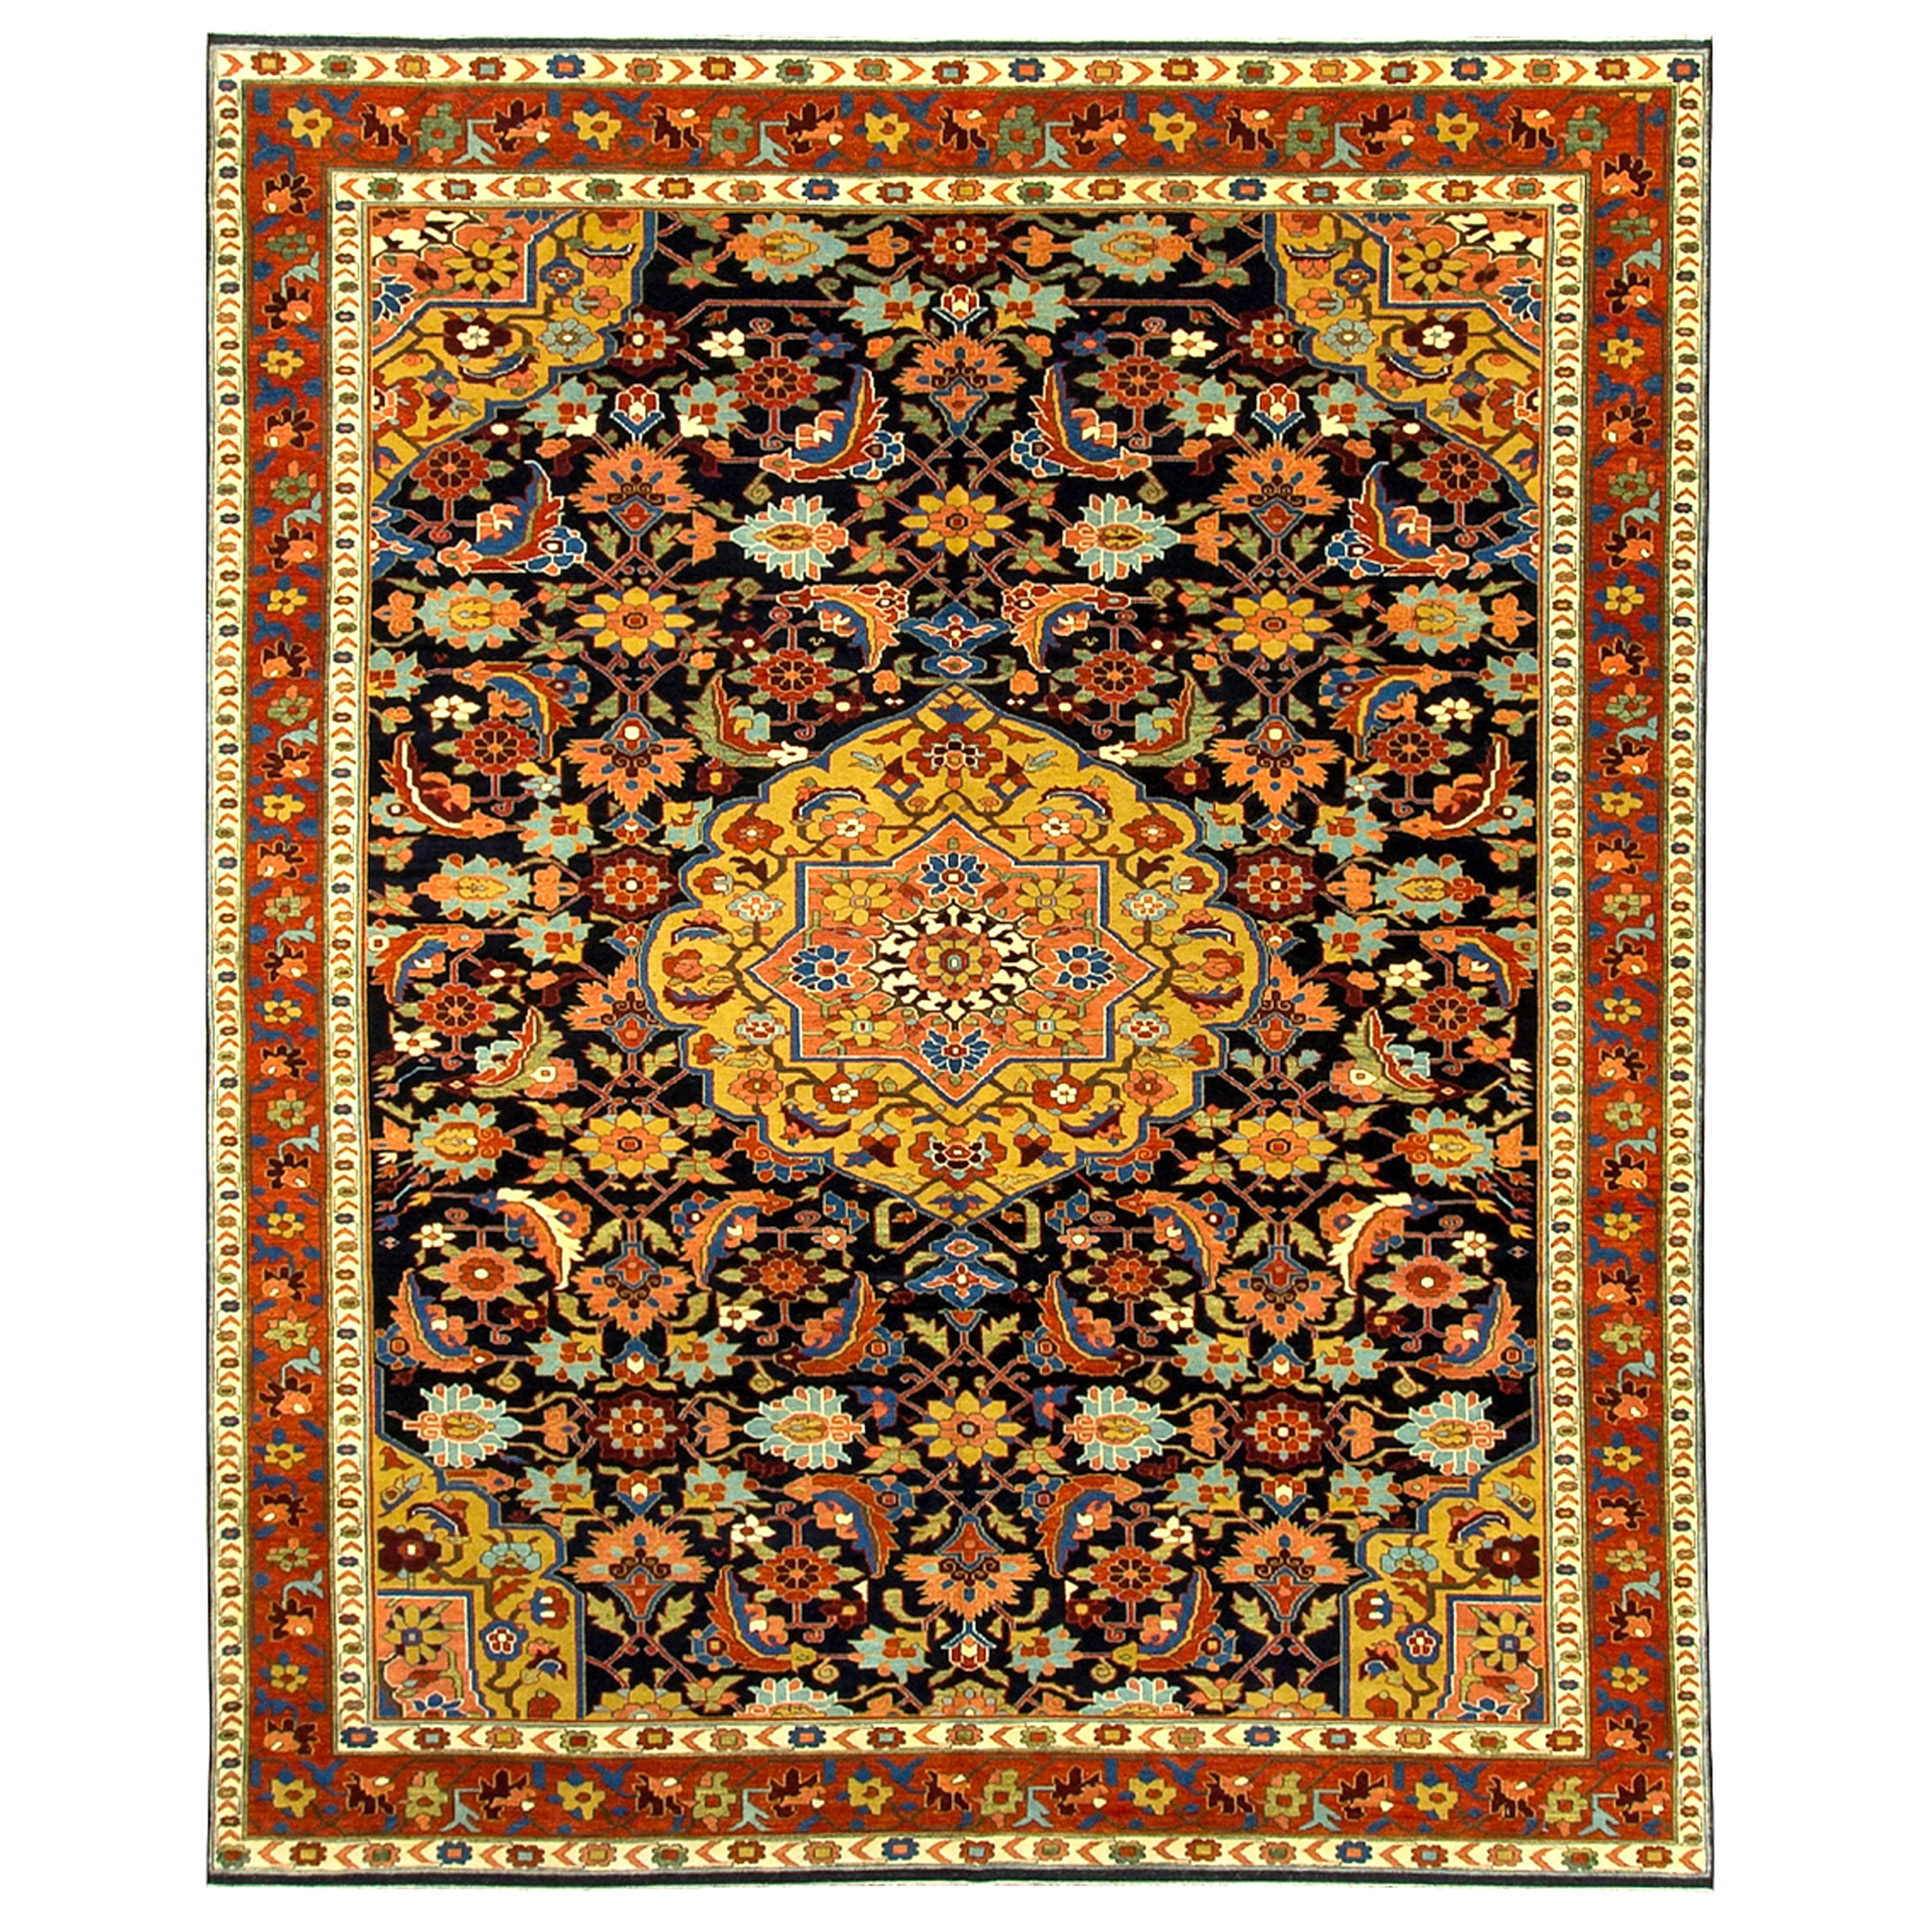 New hand woven Turkish carpet utilizing natural dyes and hand spun wool and featuring a classical Persian Herati design - Douglas Stock Gallery, antique and new Oriental rugs Boston,MA, South Natick, Wellesley, Weston,MA area, hand woven Oriental rugs New England